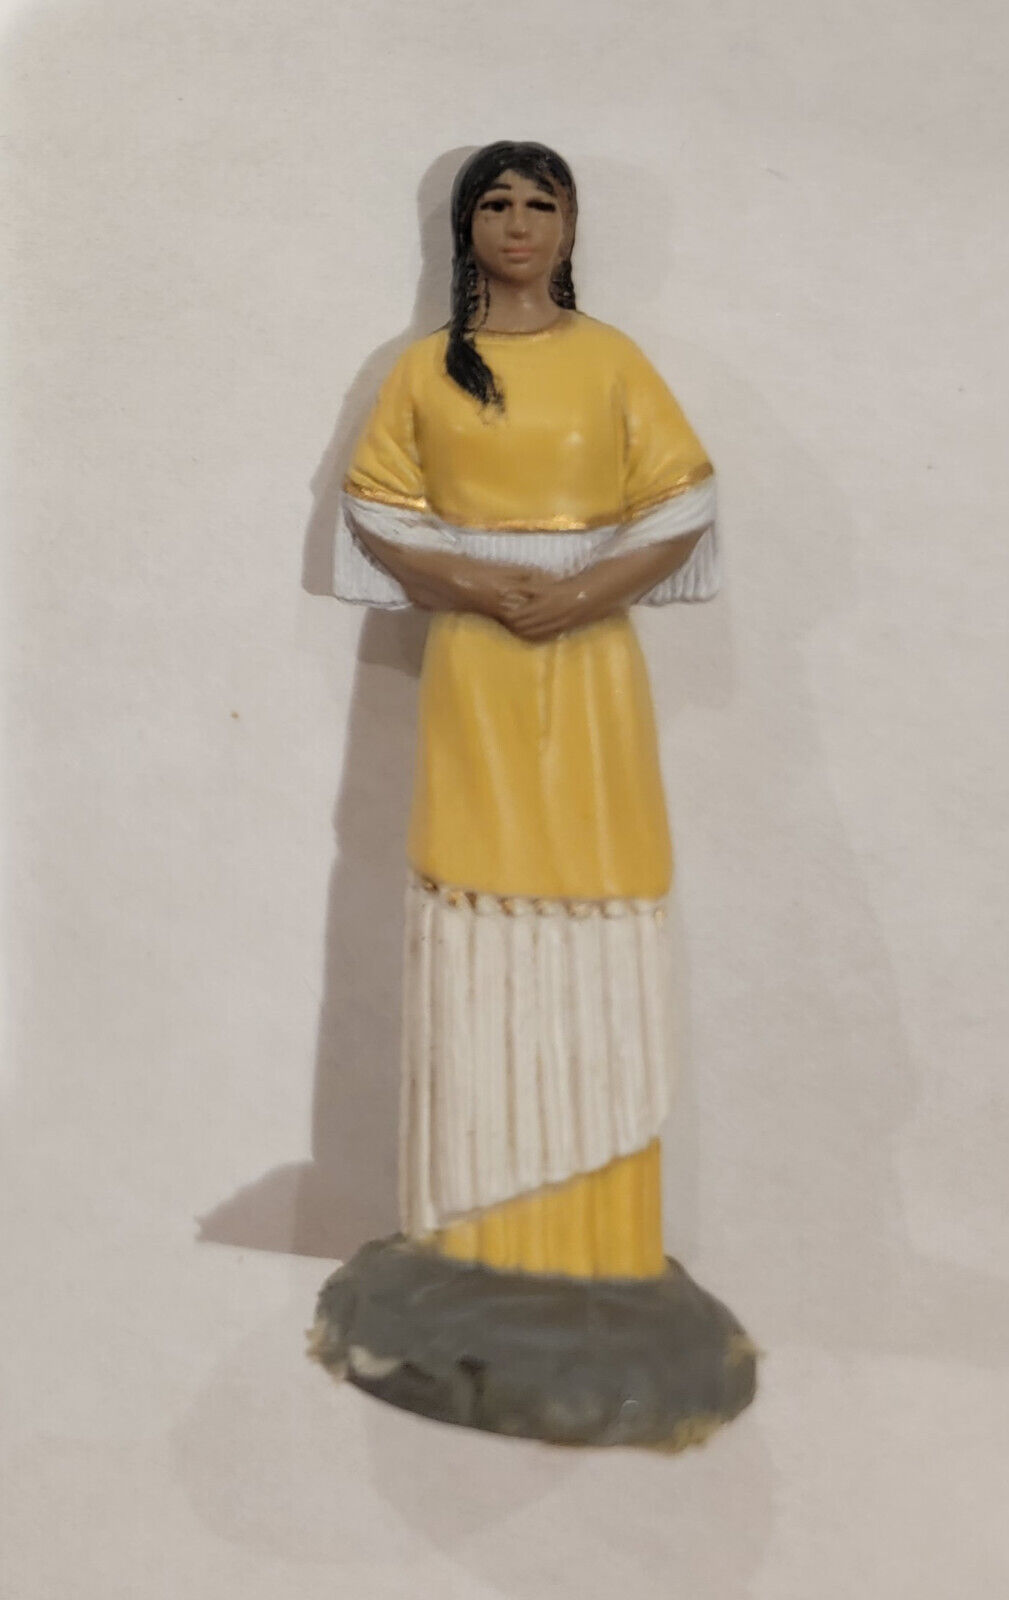 Revell Mind Crafts Indigenous American Woman Figurine • Painted Plastic